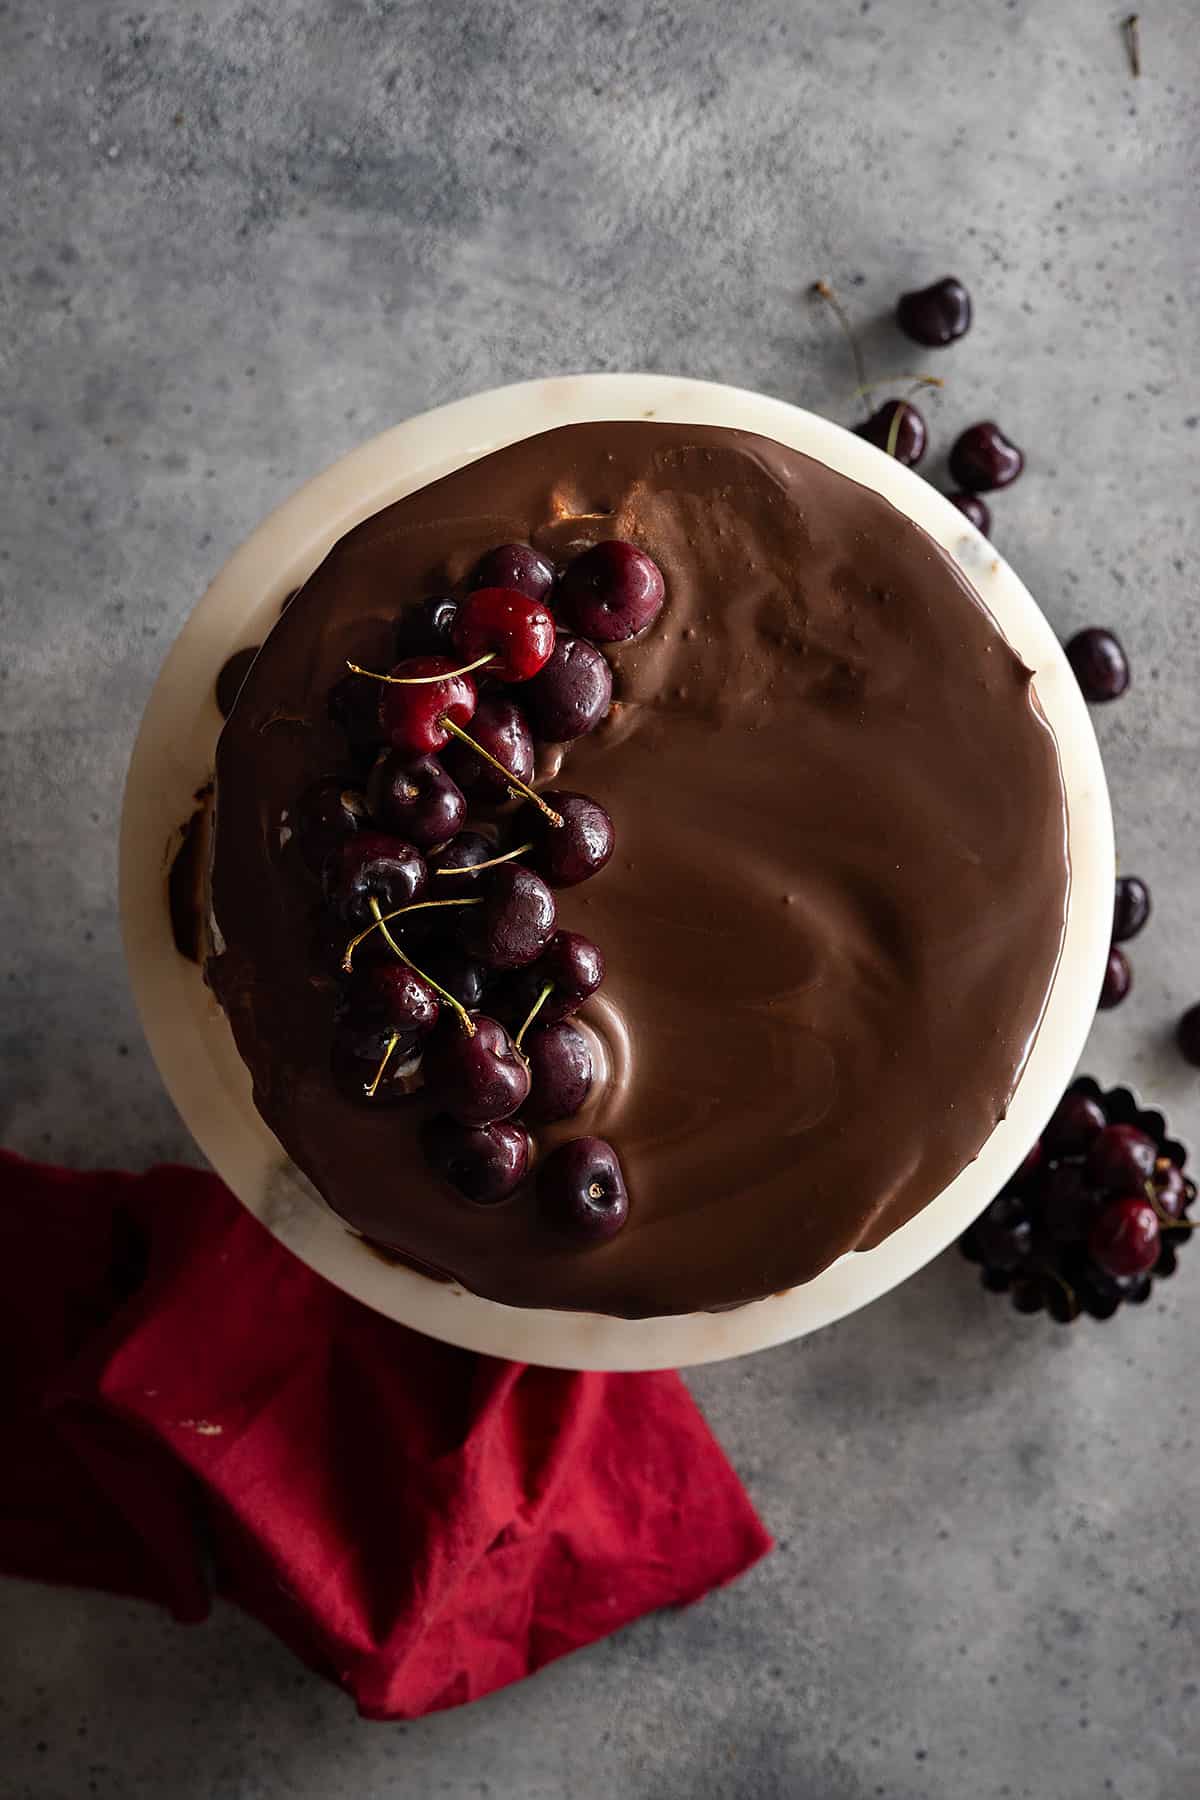 Overhead view of black forest cake topped with chocolate ganache and fresh cherries.